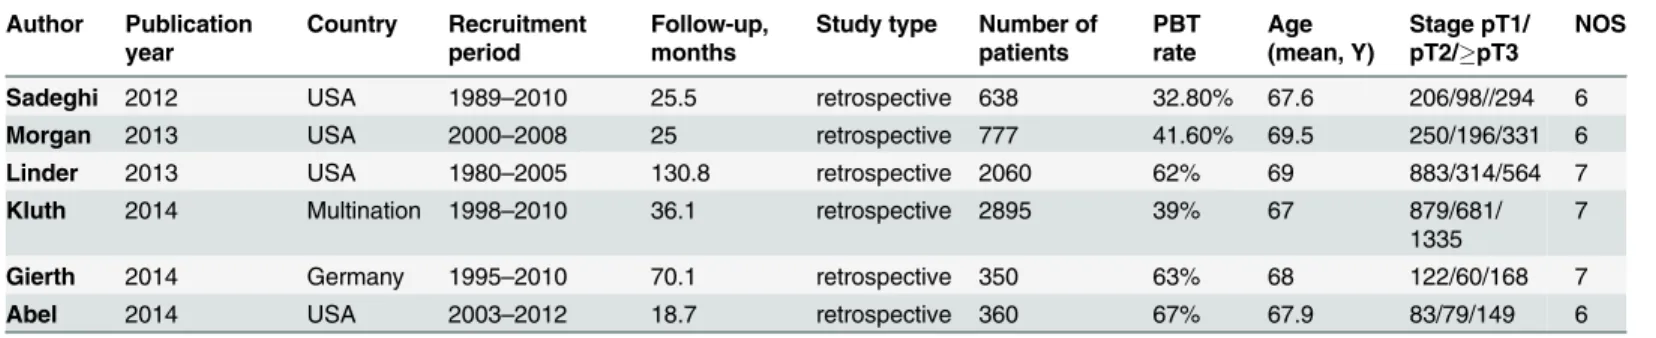 Table 1. Characteristics of the included studies for the meta-analysis.